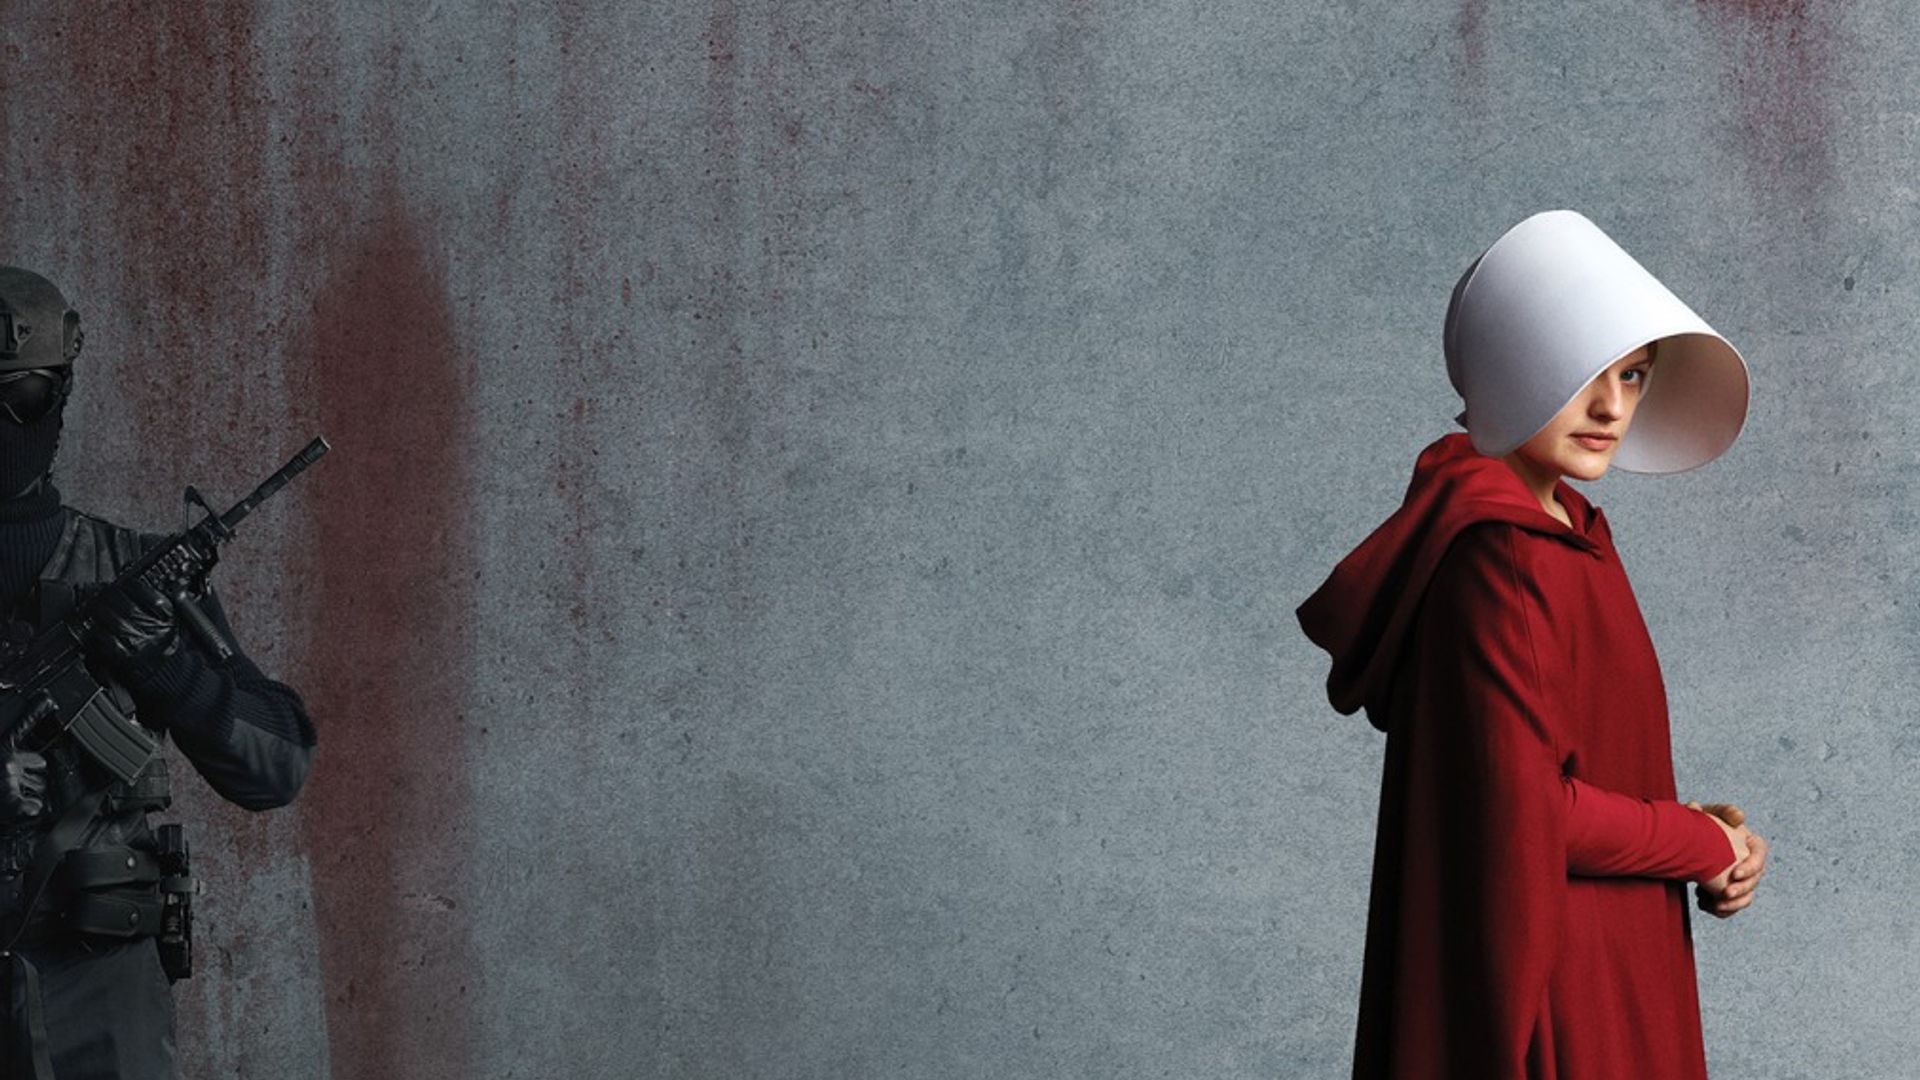 The Handmaid's Tale poster